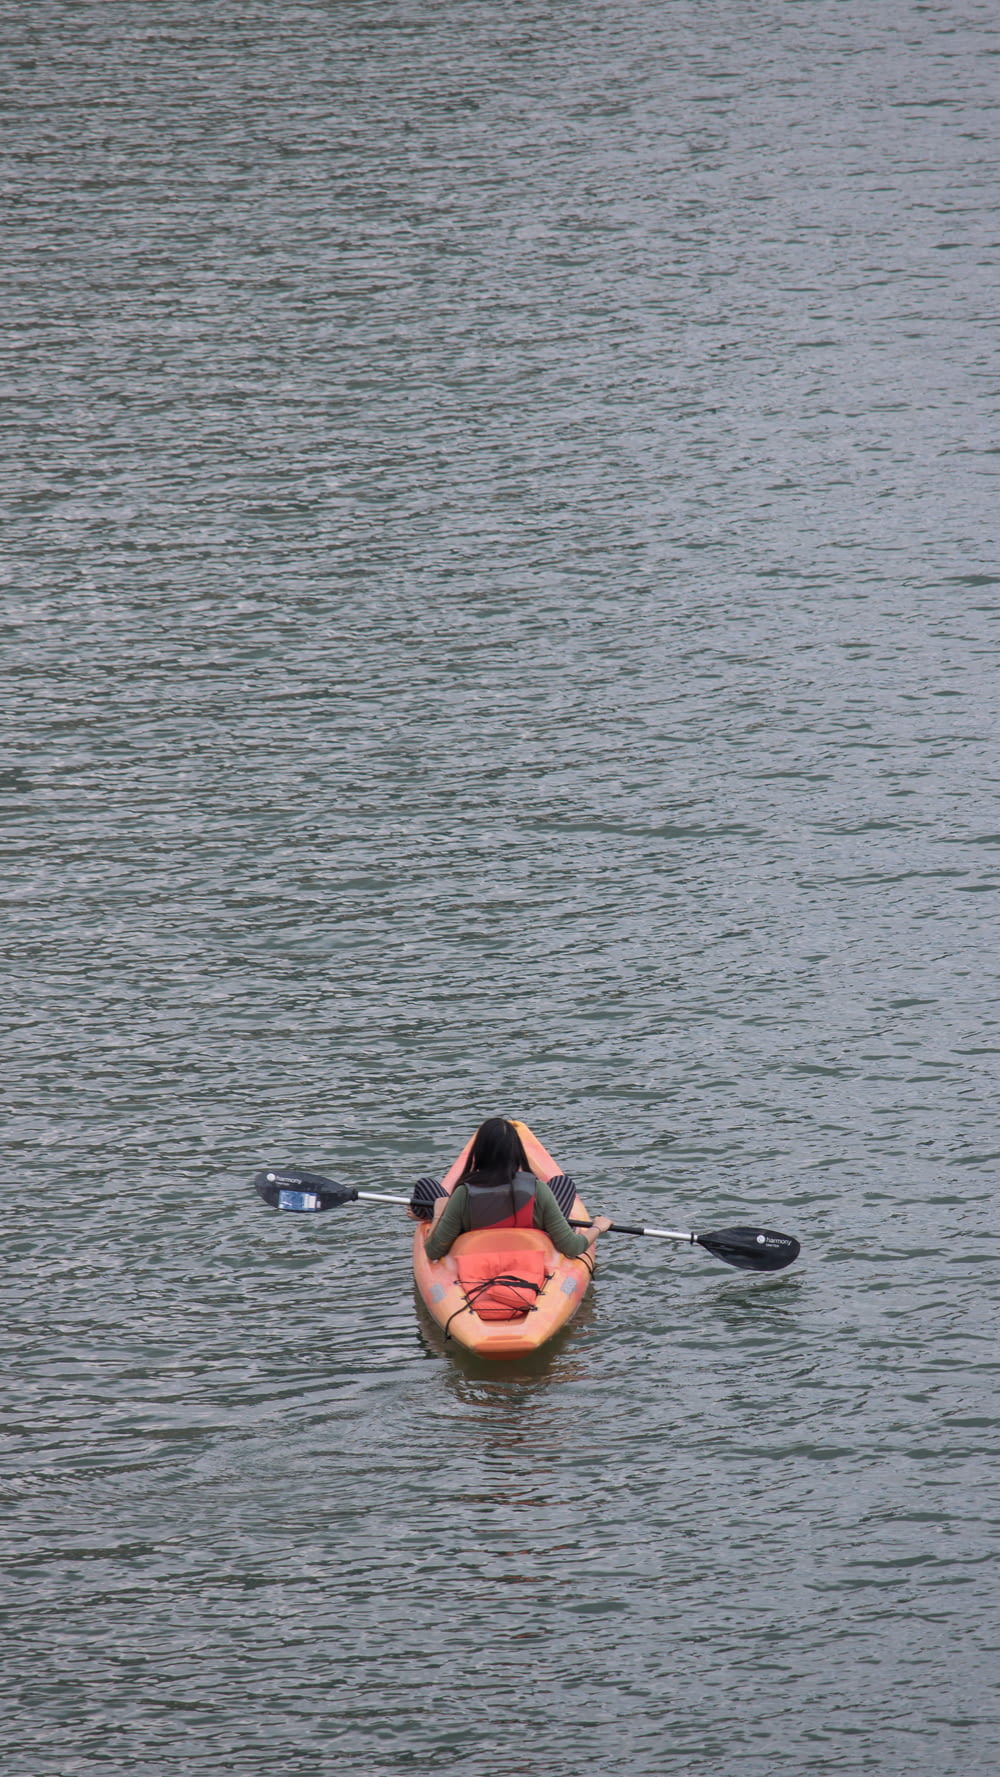 person on kayak on body of water